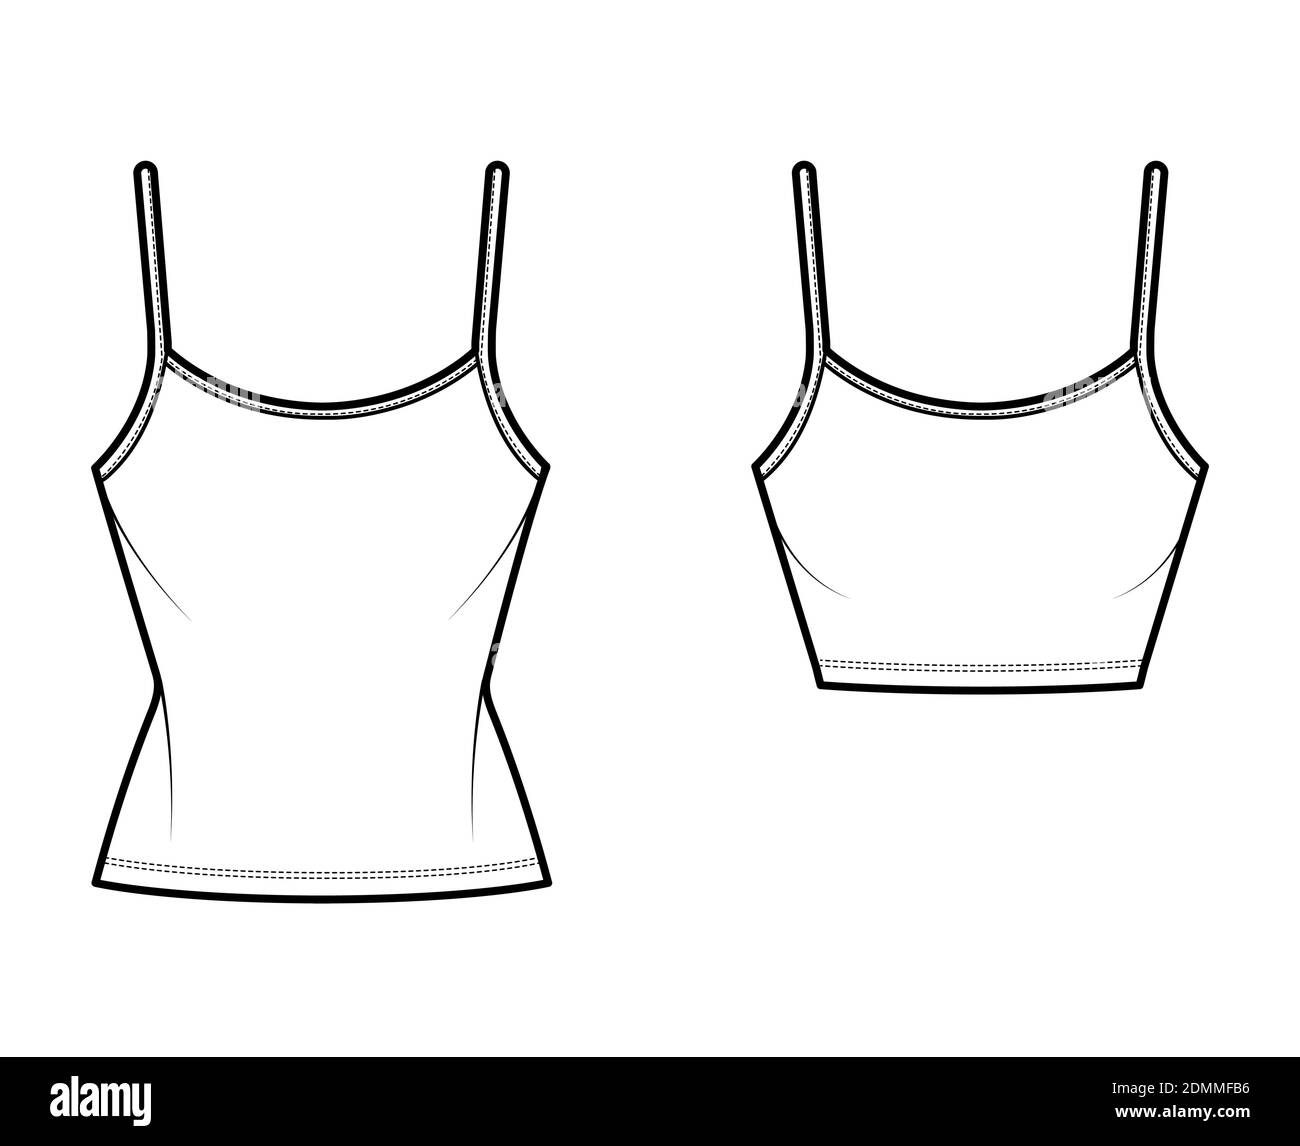 Set of Camisoles scoop neck cotton-jersey top technical fashion  illustration with thin adjustable straps, slim fit, crop, tunic length.  Flat tank template front white color. Women men CAD mockup Stock Vector  Image